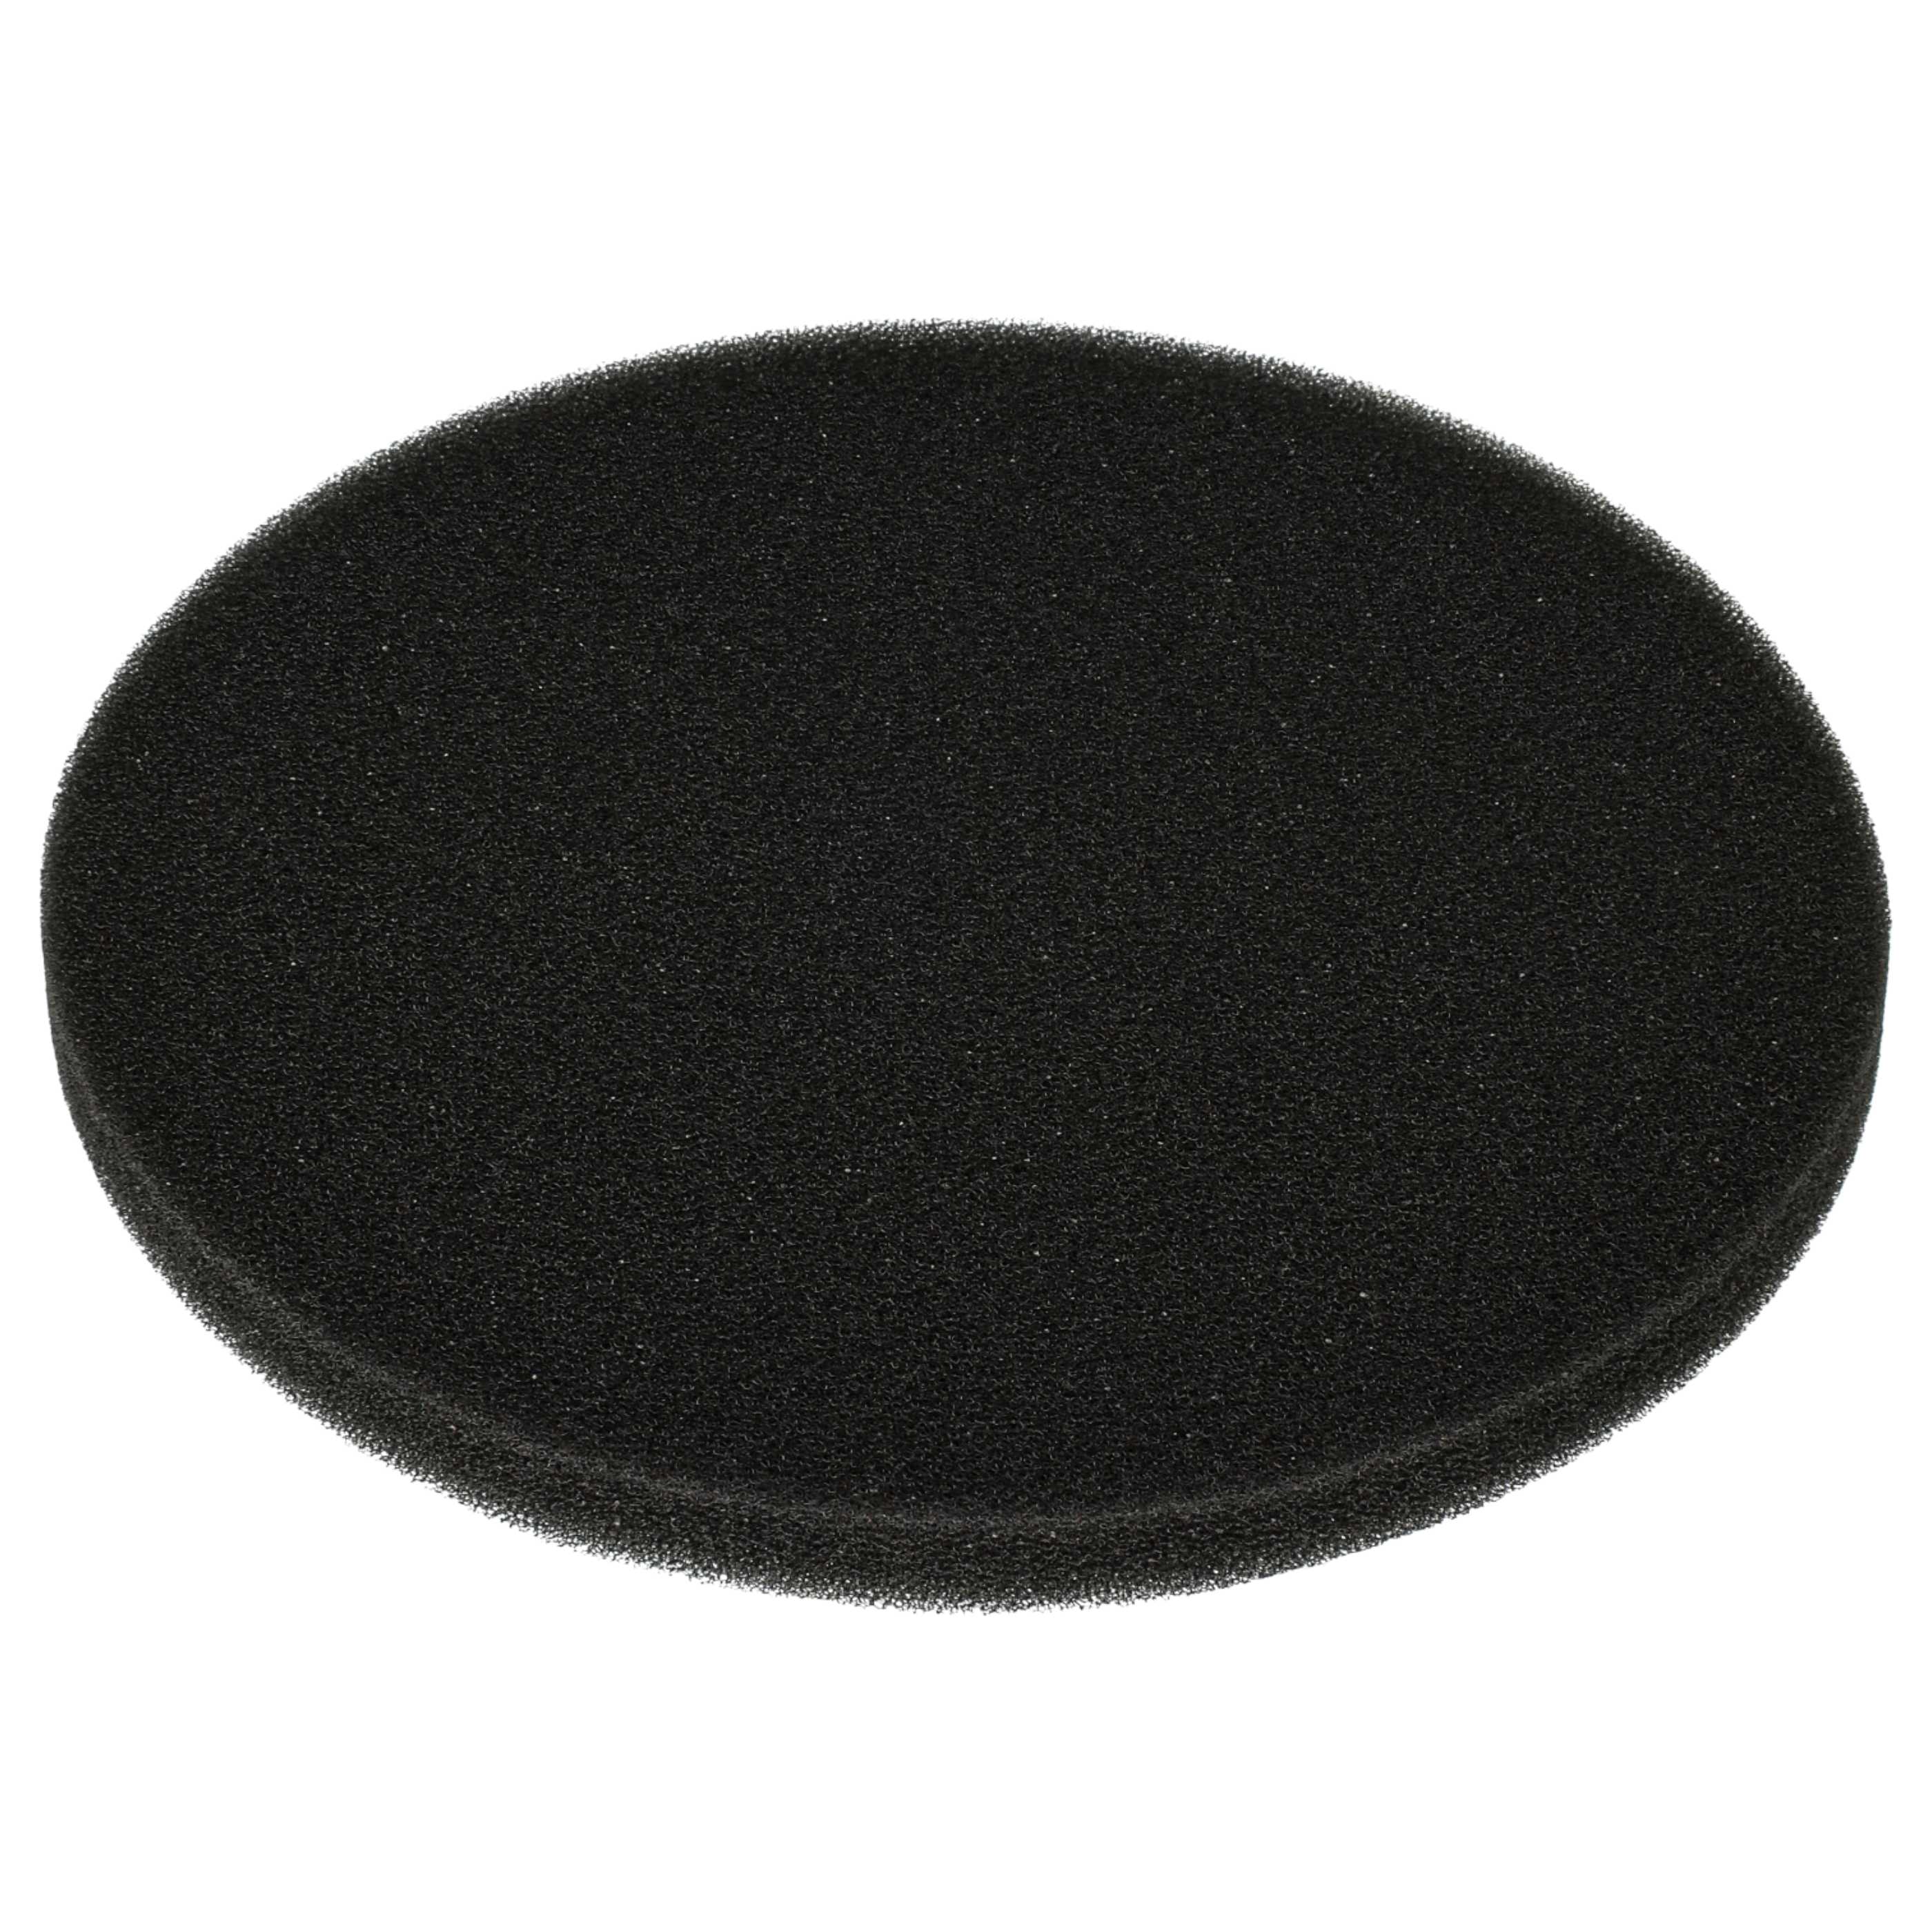 vhbw 8x Air Filter G3 Replacement for Bosch 7735600382 for Vent, Condensation Damp Control Ventilator - Black